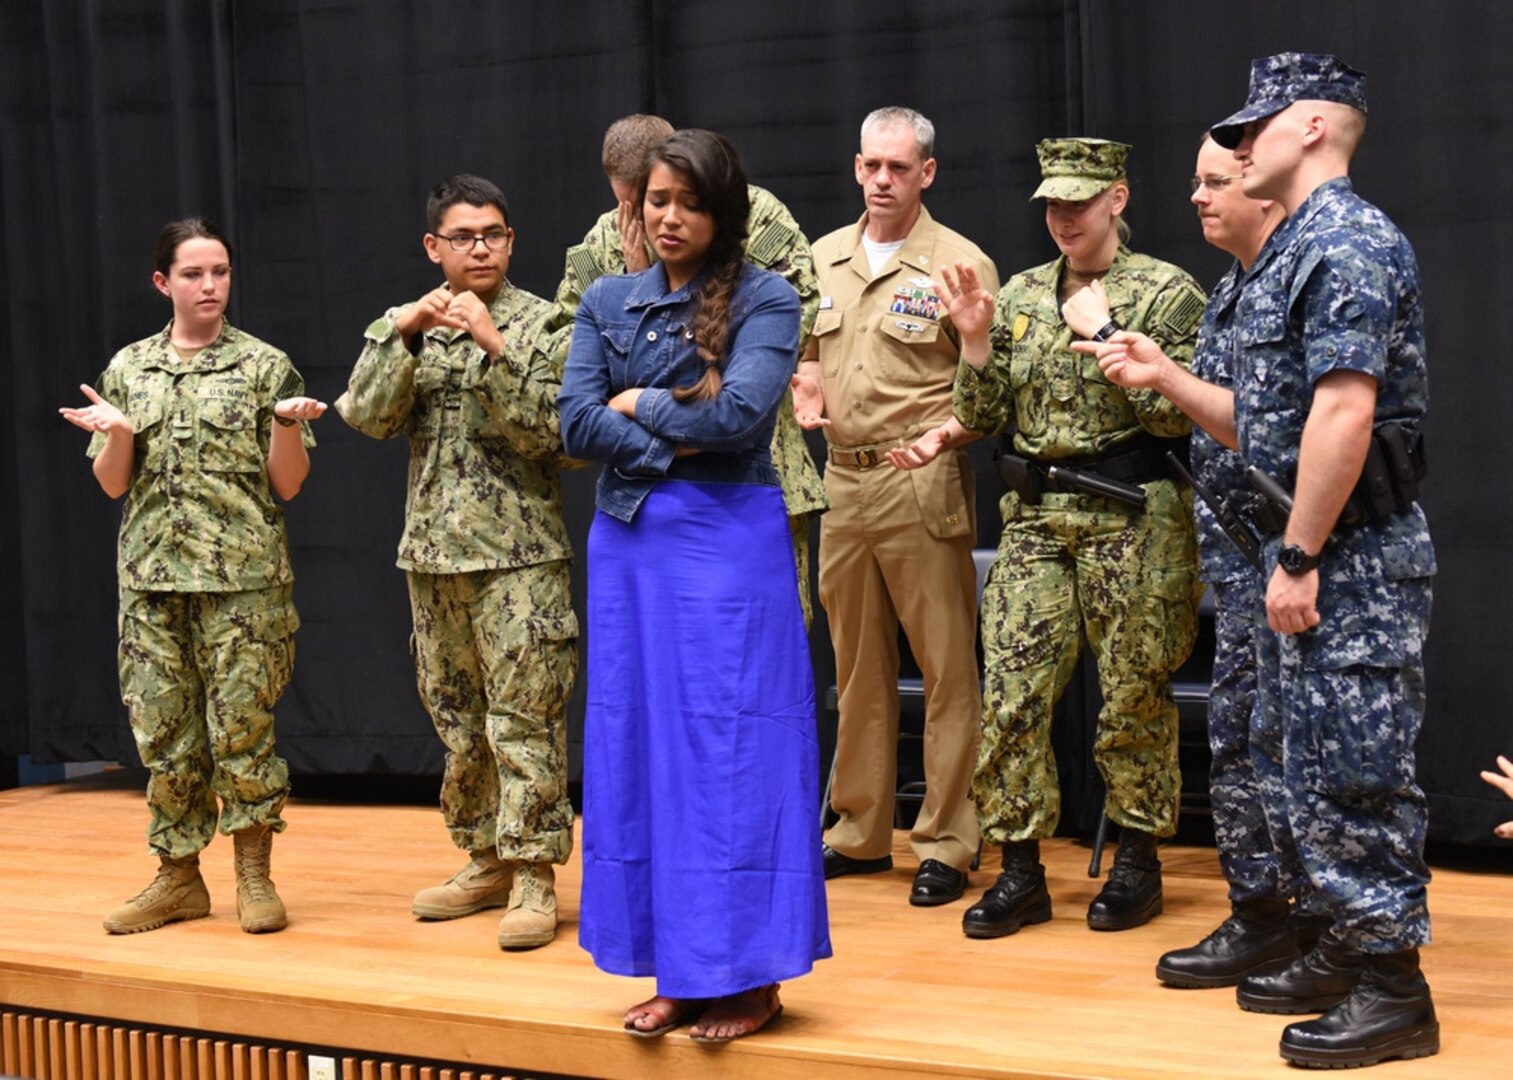 CHINHAE, Republic of Korea, (June 19, 2015) Sailors from Commander. Naval Forces Korea participate with actor Briza Covarrubias of the acting troupe InterACT during a Sexual Assault Prevention and Response training scenario at Commander, Fleet Activities Chinhae. (U.S. Navy photo by Mass Communication Specialist 1st Class Abraham Essenmacher/Released)